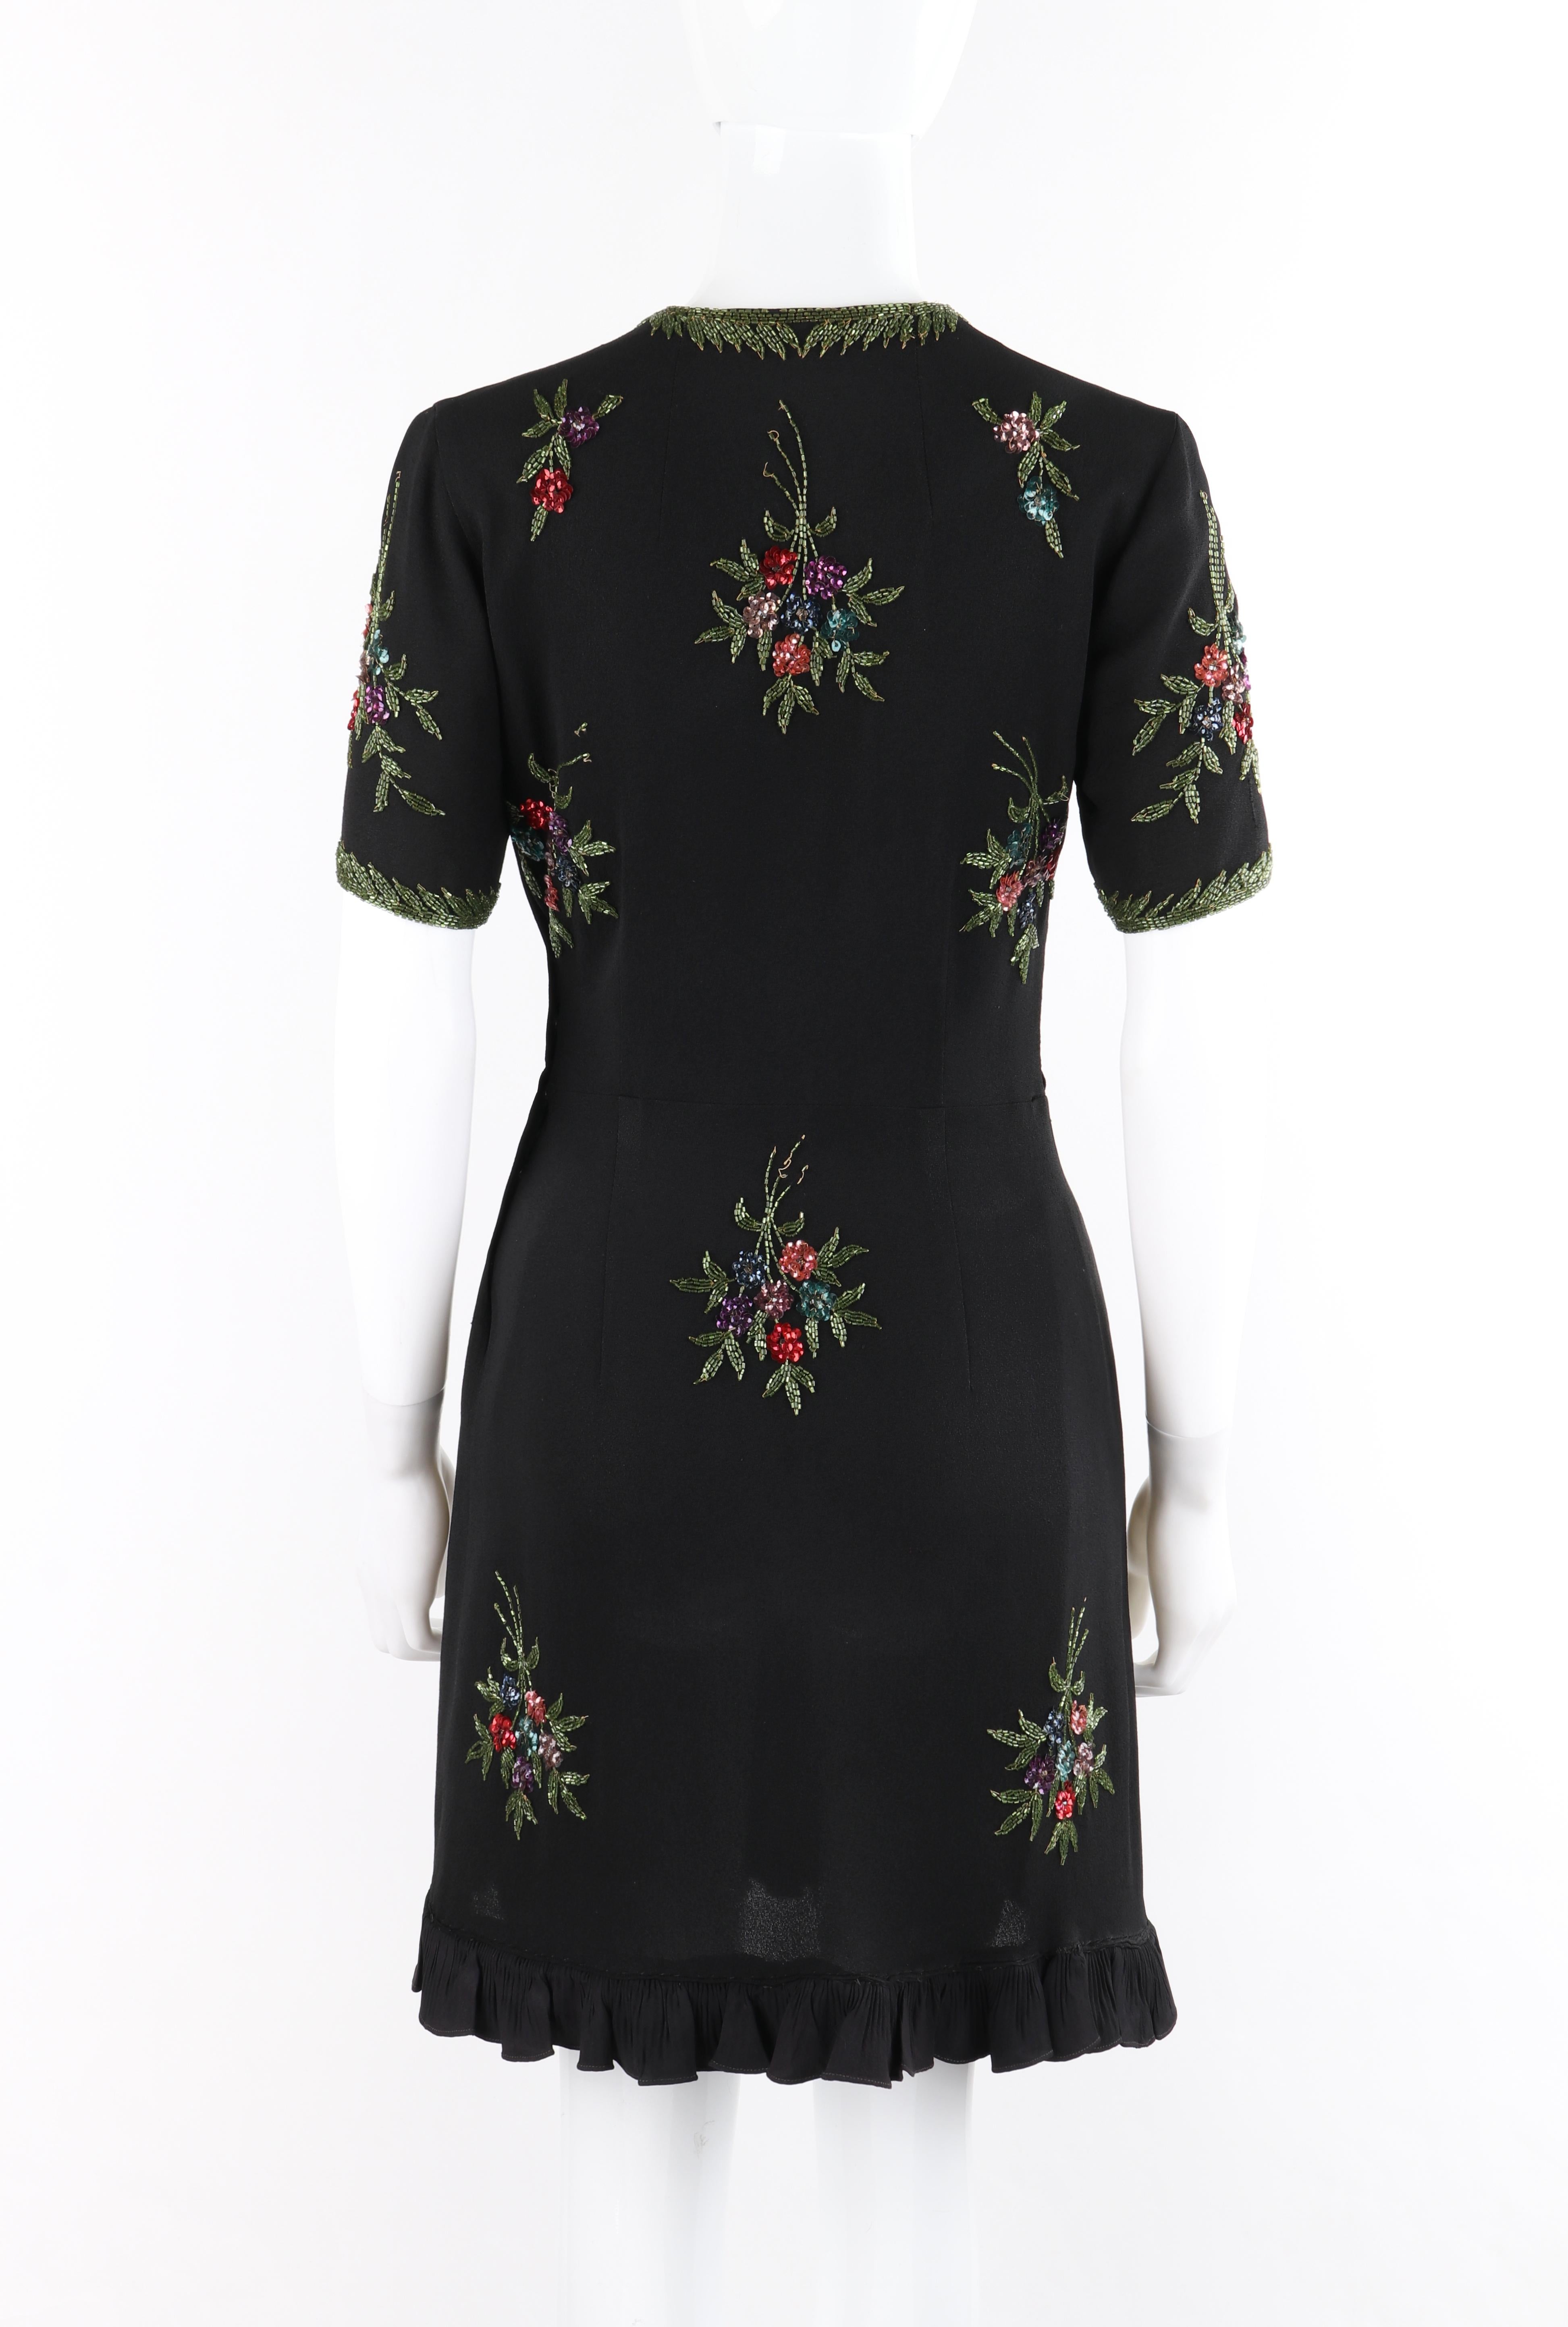 Women's Couture c. 1940’s Black Multicolor Floral Glass Bead Embroidered Shift Dress